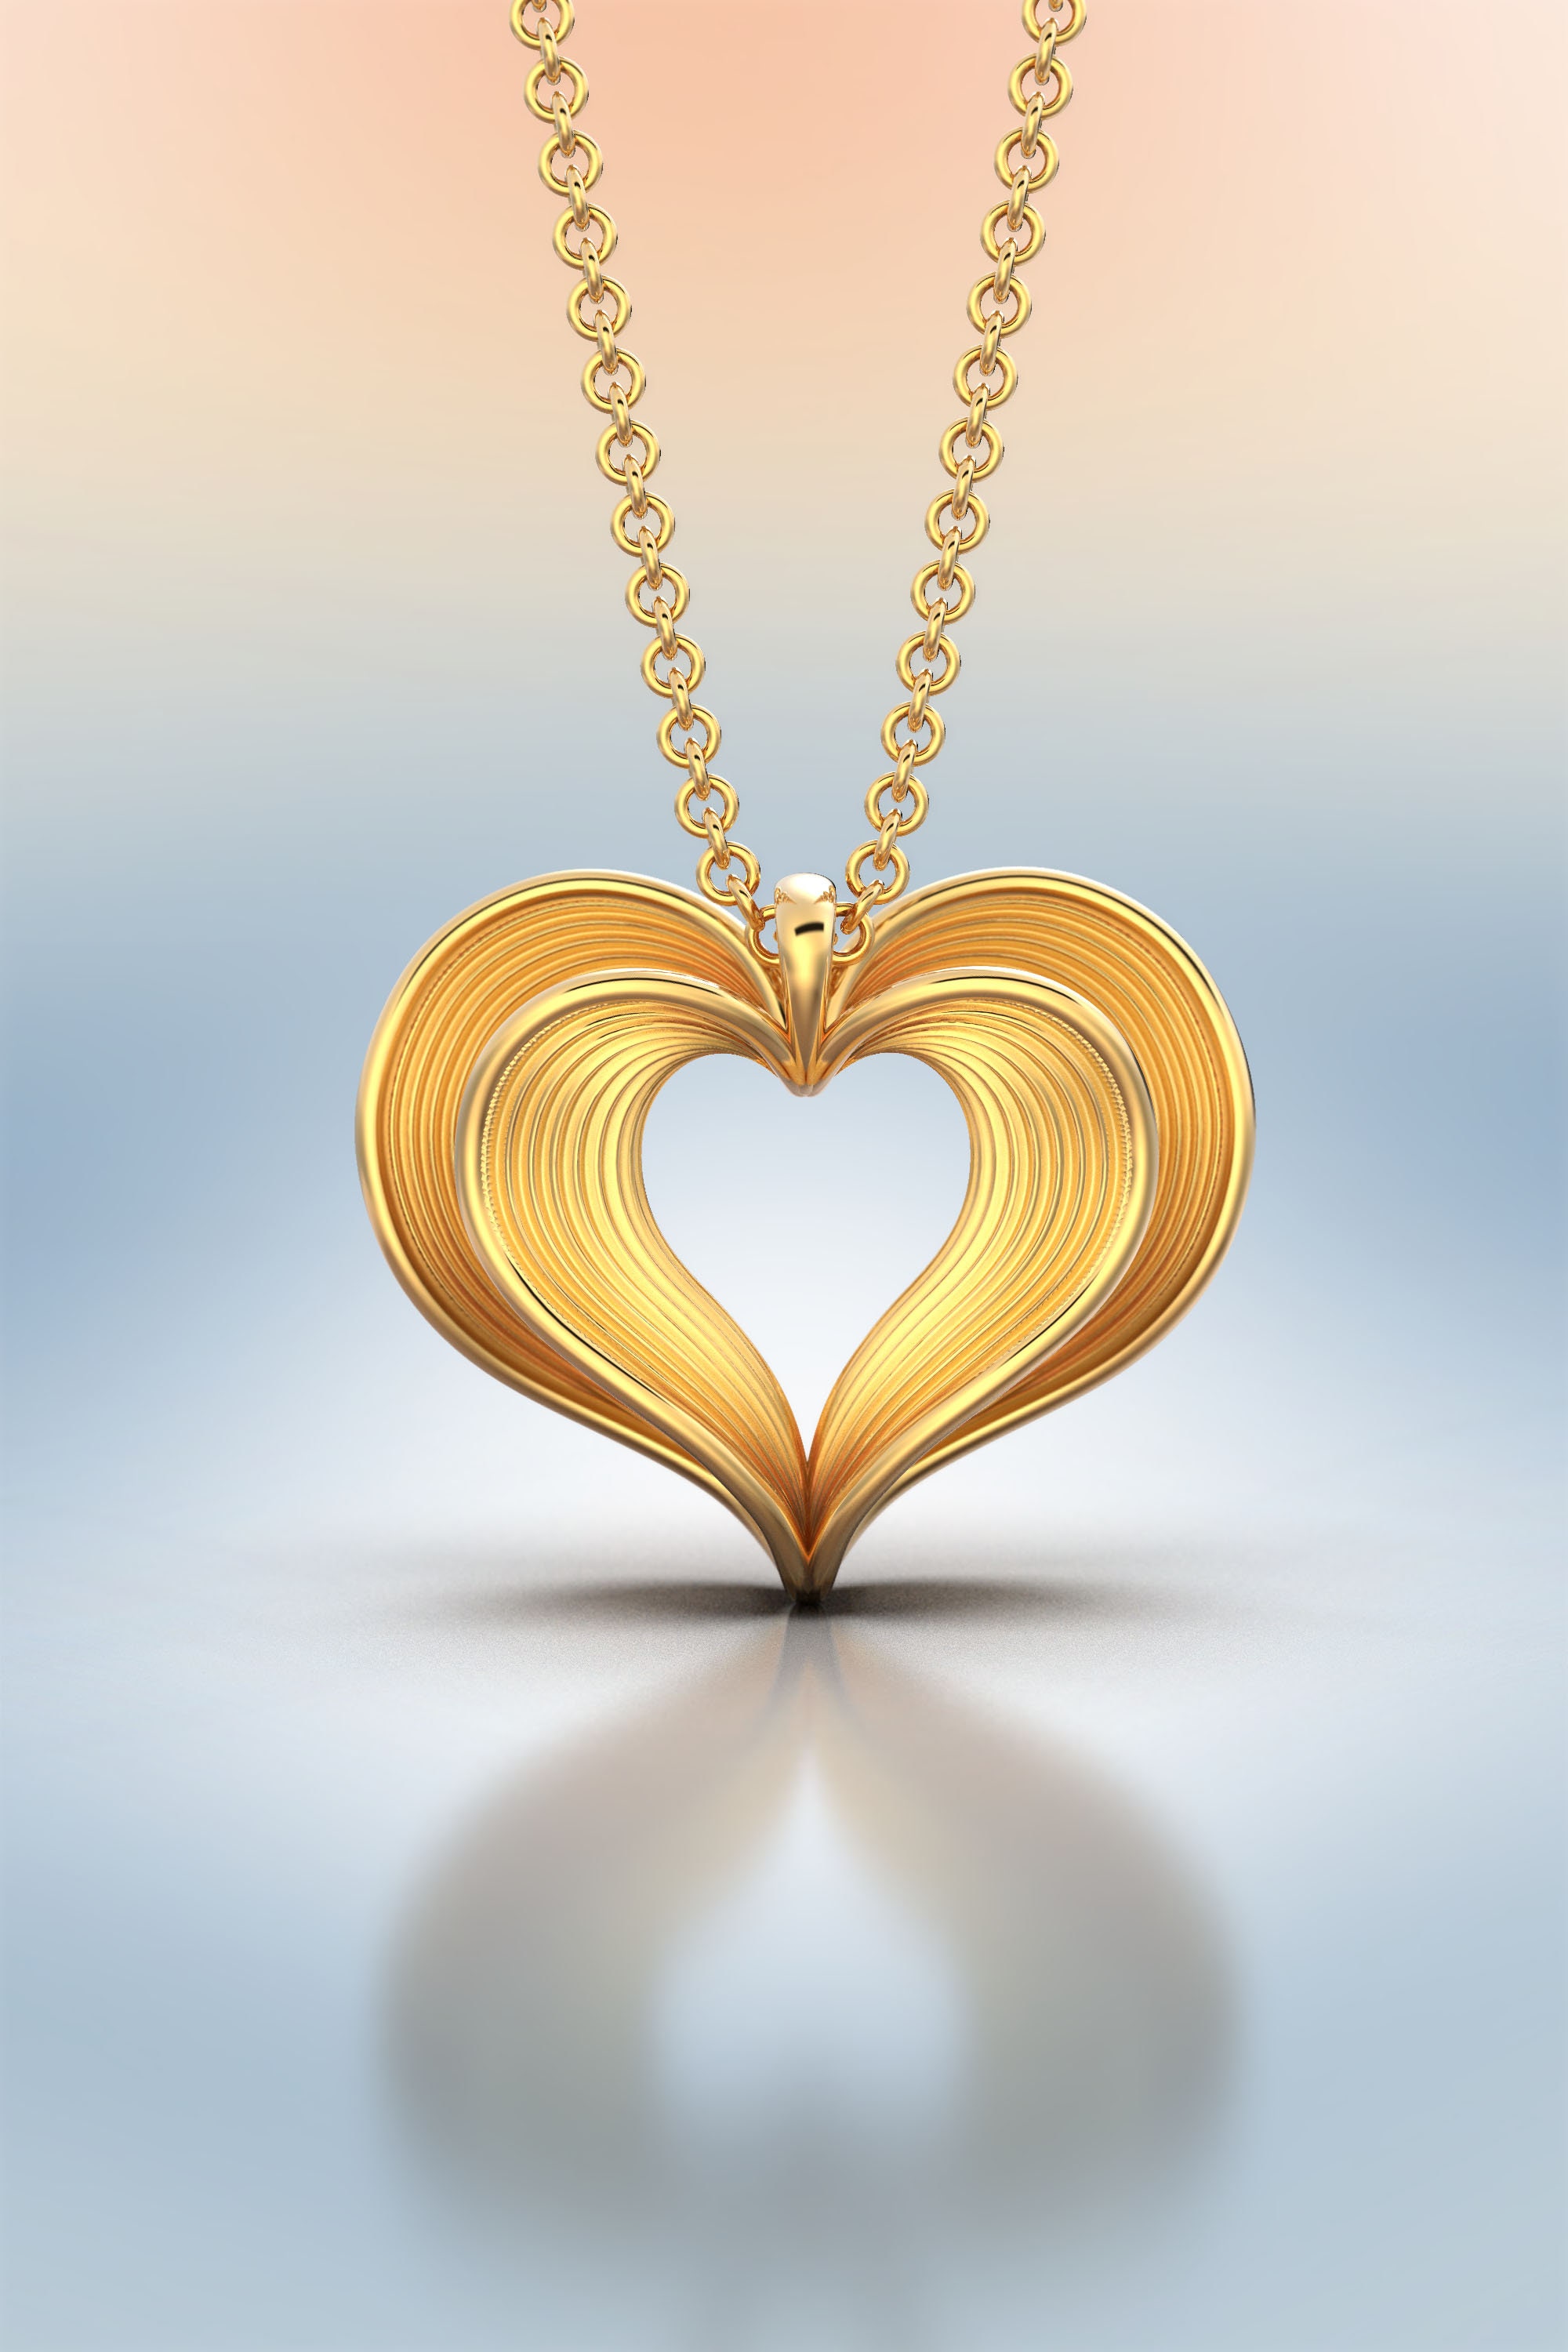 Heart Necklace, Solid Gold Heart Pendant Made in Italy 18K Or 14K. Italian Fine Jewelry